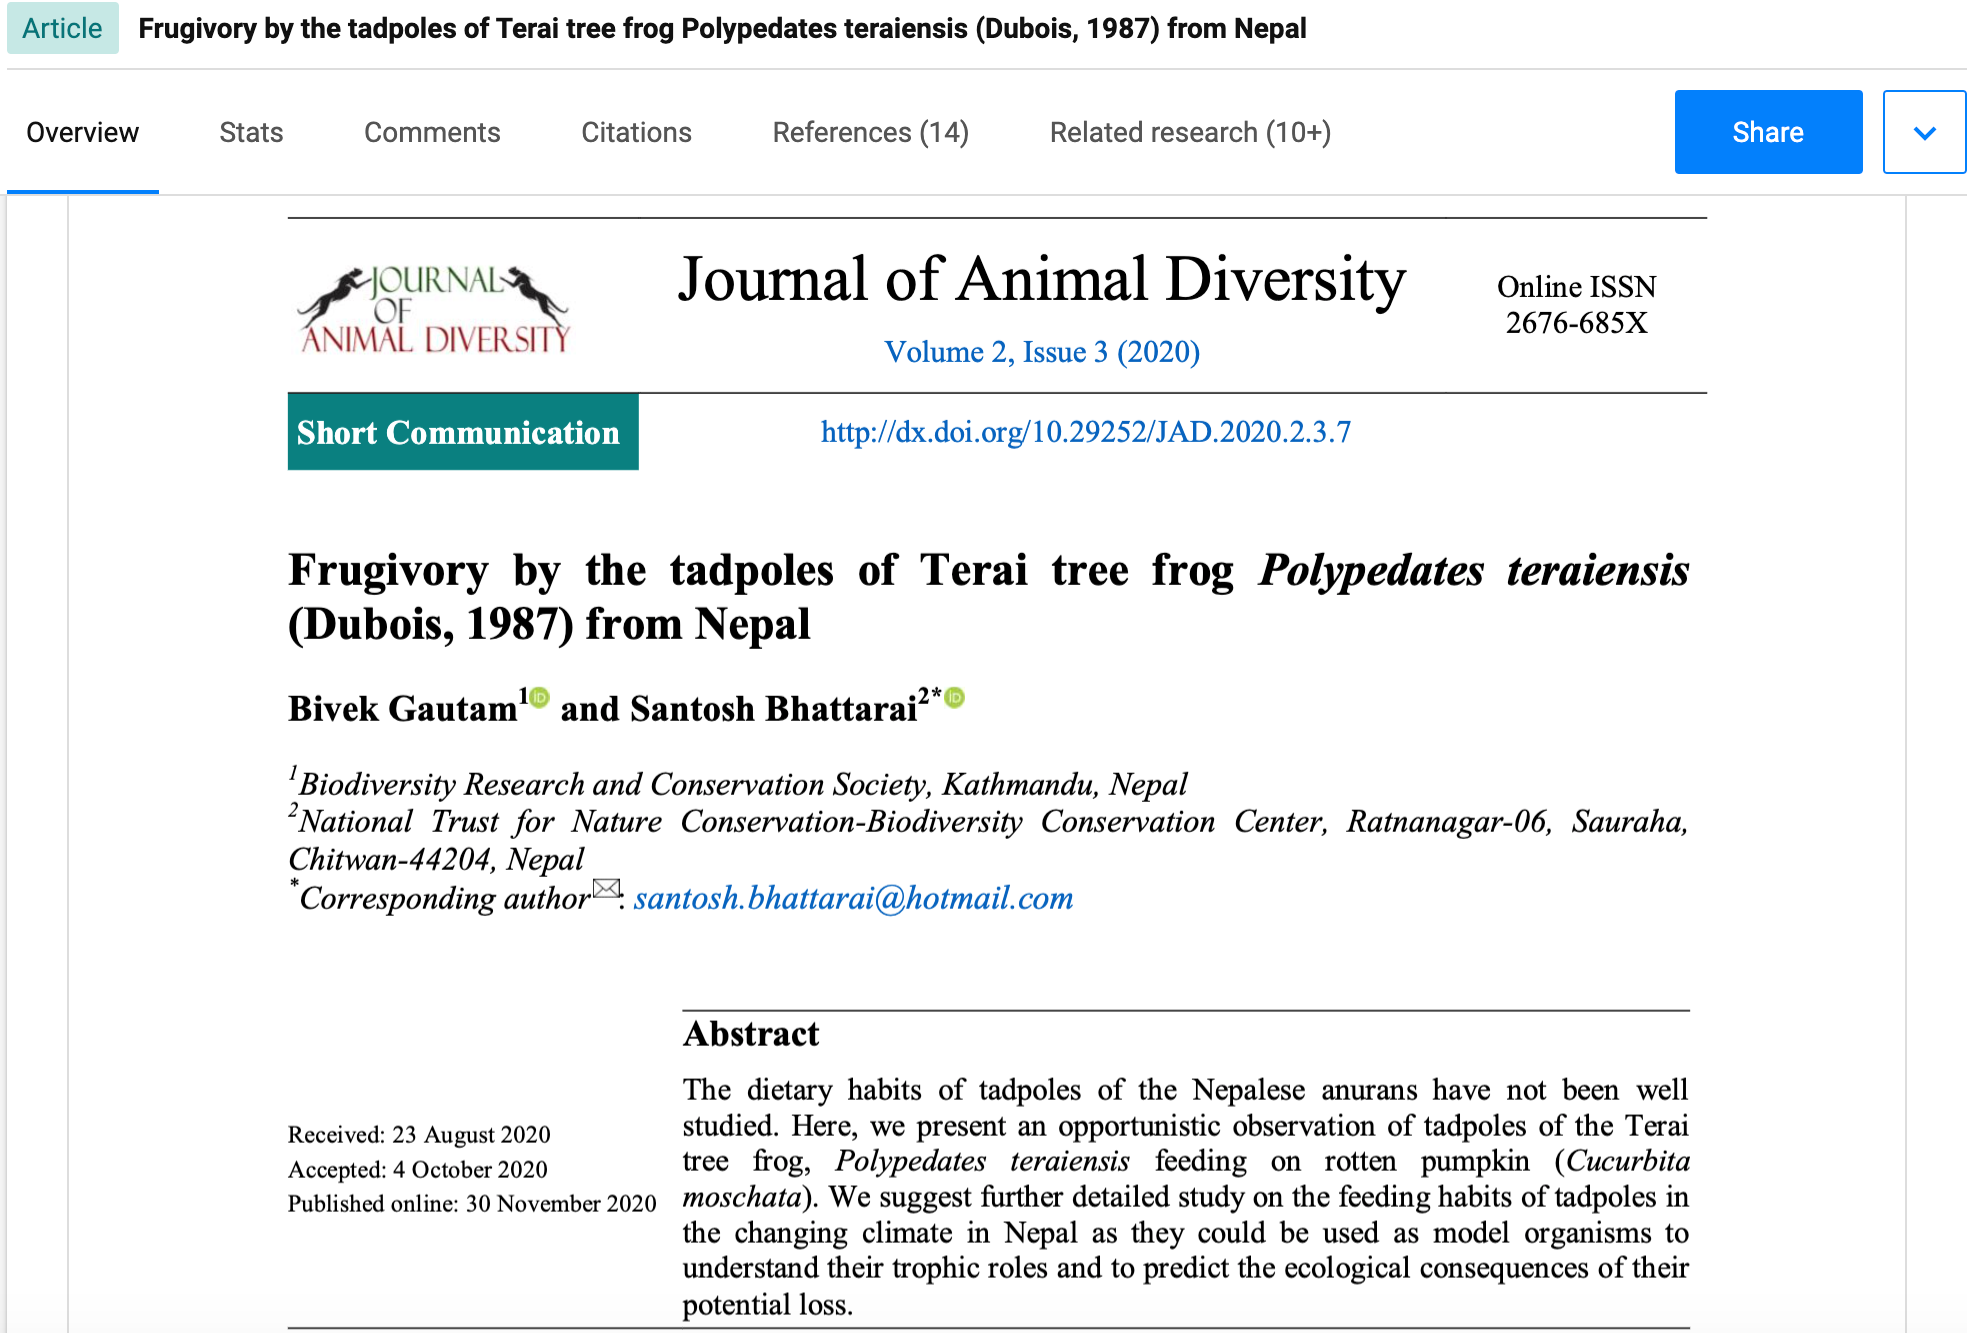 <p>Frugivory by the tadpoles of Terai tree frog <em>Polypedates teraiensis</em> (Dubois, 1987) from Nepal</p>,<p>The dietary habits of tadpoles of the Nepalese anurans have not been well studied. Here, we present an opportunistic observation of tadpoles of the Terai tree frog, Polypedates teraiensis feeding on rotten pumpkin (Cucurbita moschata). We suggest further detailed study on the feeding habits of tadpoles in the changing climate in Nepal as they could be used as model organisms to understand their trophic roles and to predict the ecological consequences of their potential loss.<br />
&nbsp;</p>,https://www.researchgate.net/publication/346496921_Frugivory_by_the_tadpoles_of_Terai_tree_frog_Polypedates_teraiensis_Dubois_1987_from_Nepal